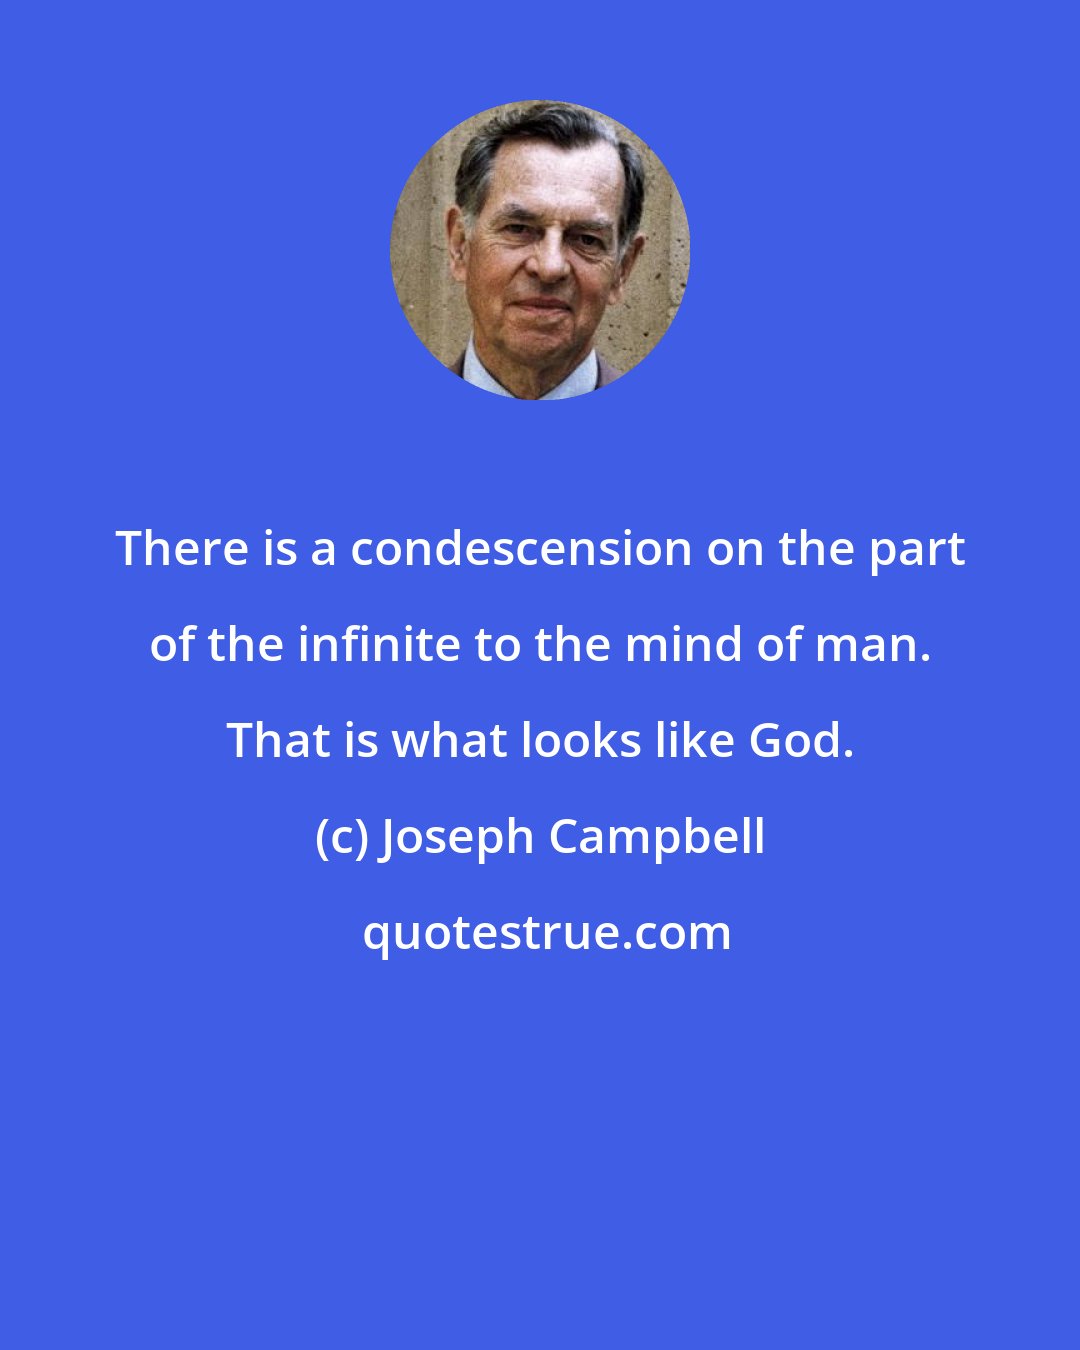 Joseph Campbell: There is a condescension on the part of the infinite to the mind of man. That is what looks like God.